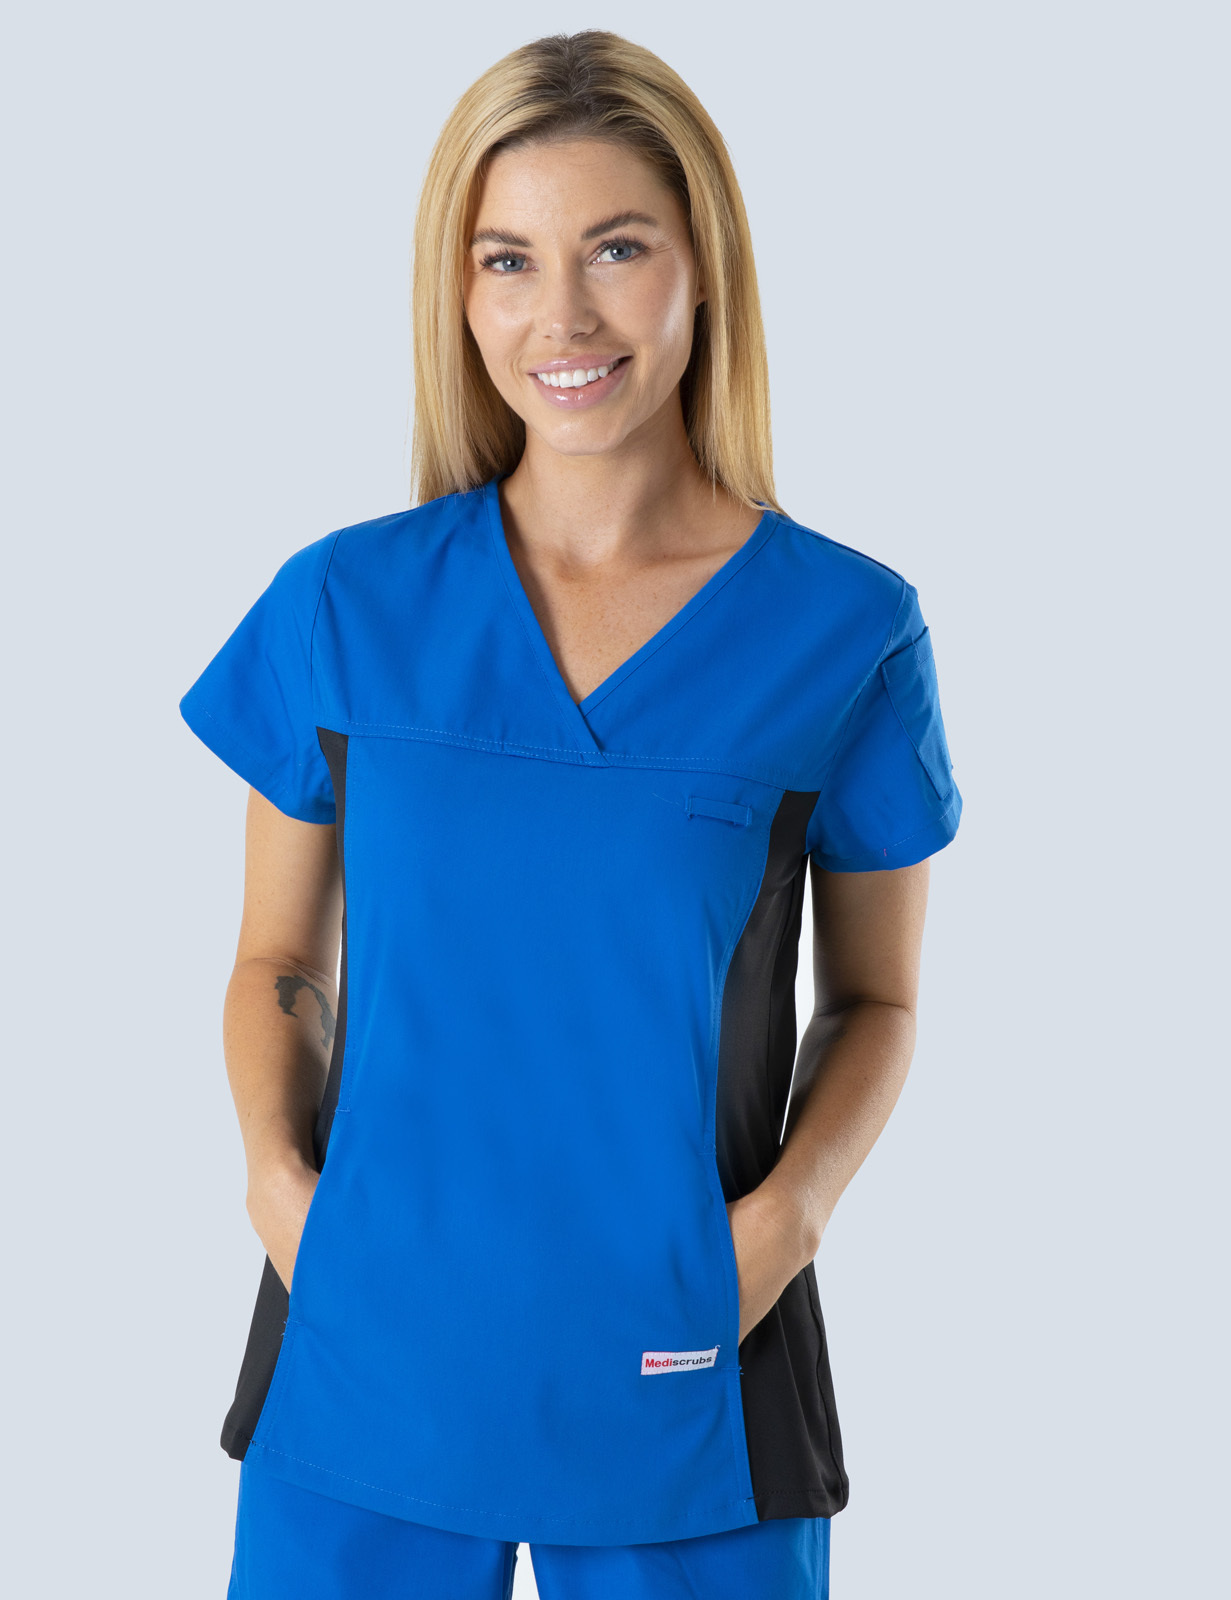 Women's Fit Solid Scrub Top With Spandex Panel - Royal - 4X large